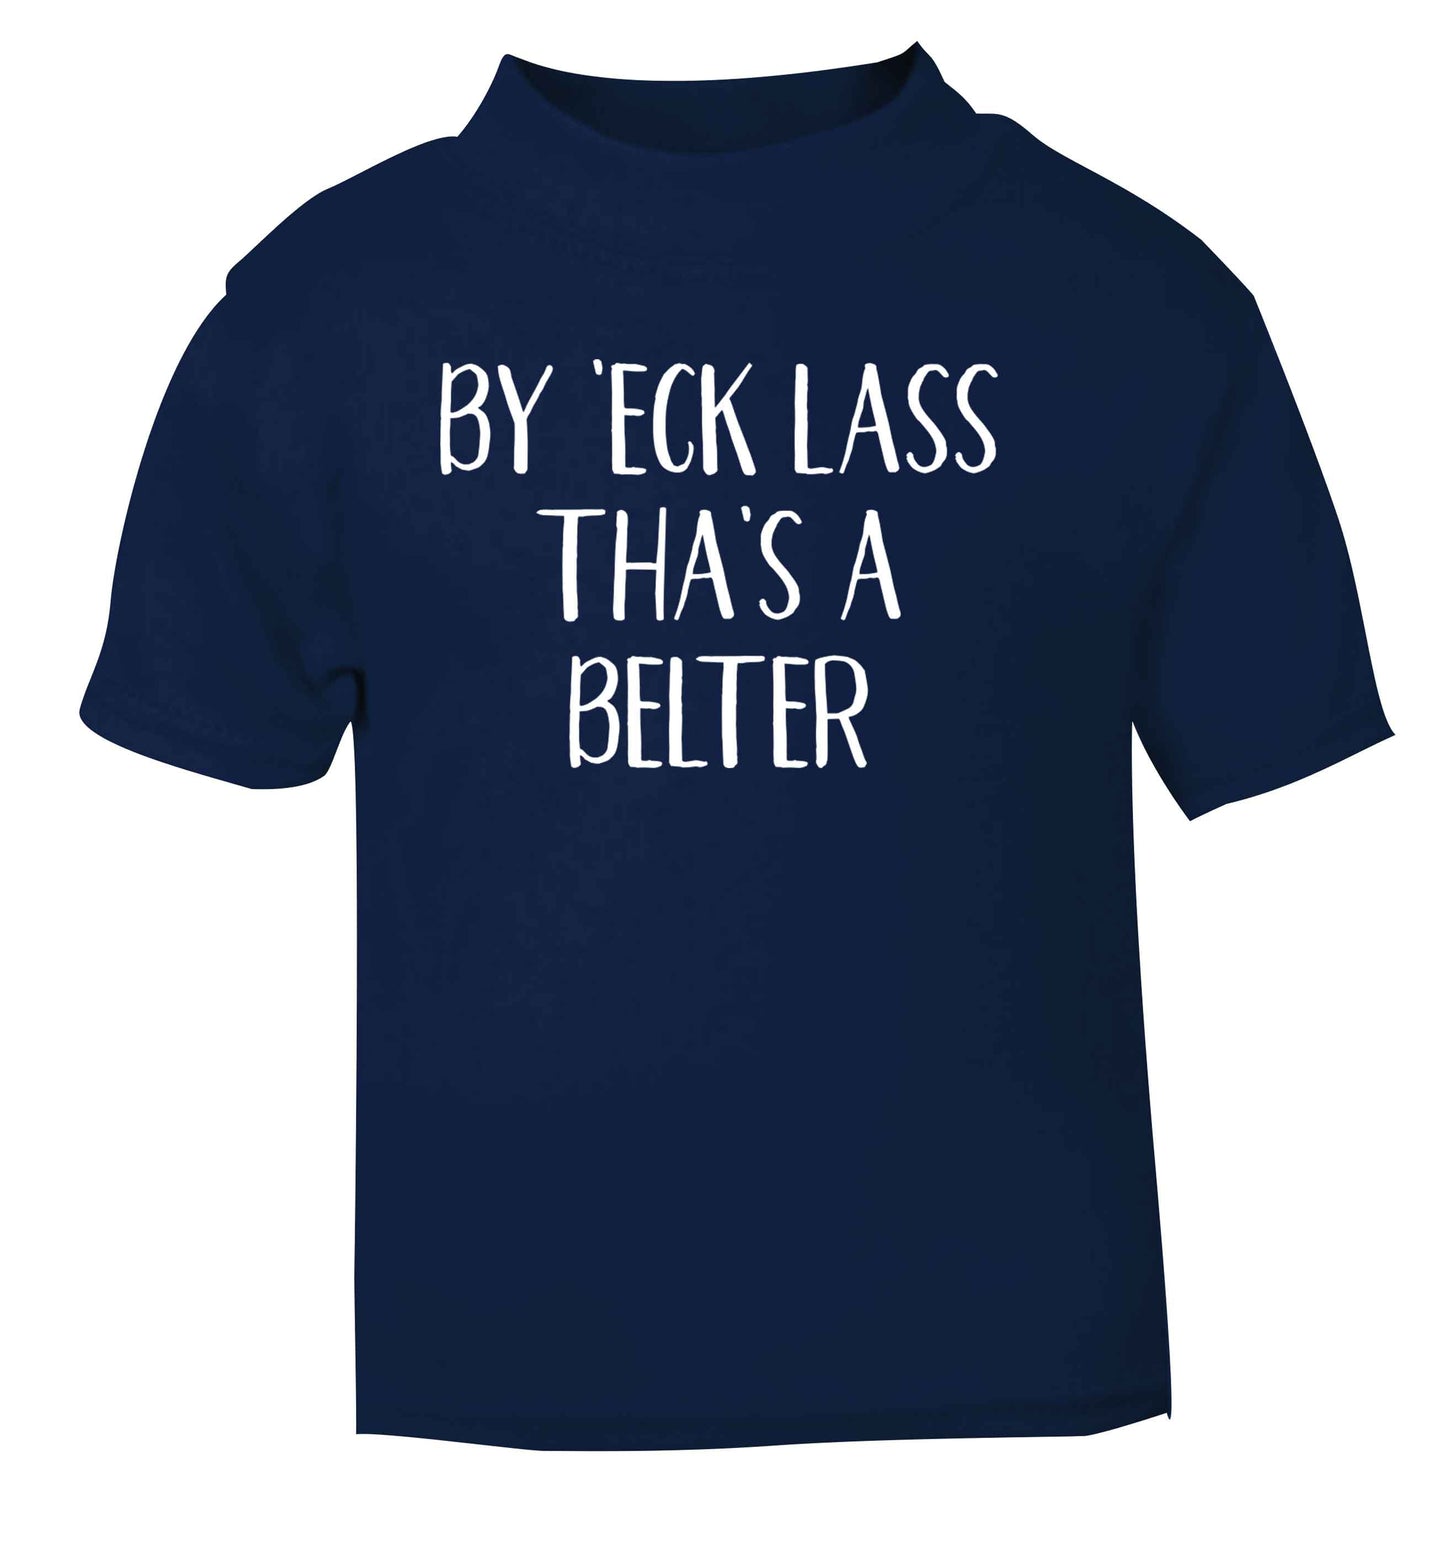 Be 'eck lass tha's a belter navy Baby Toddler Tshirt 2 Years